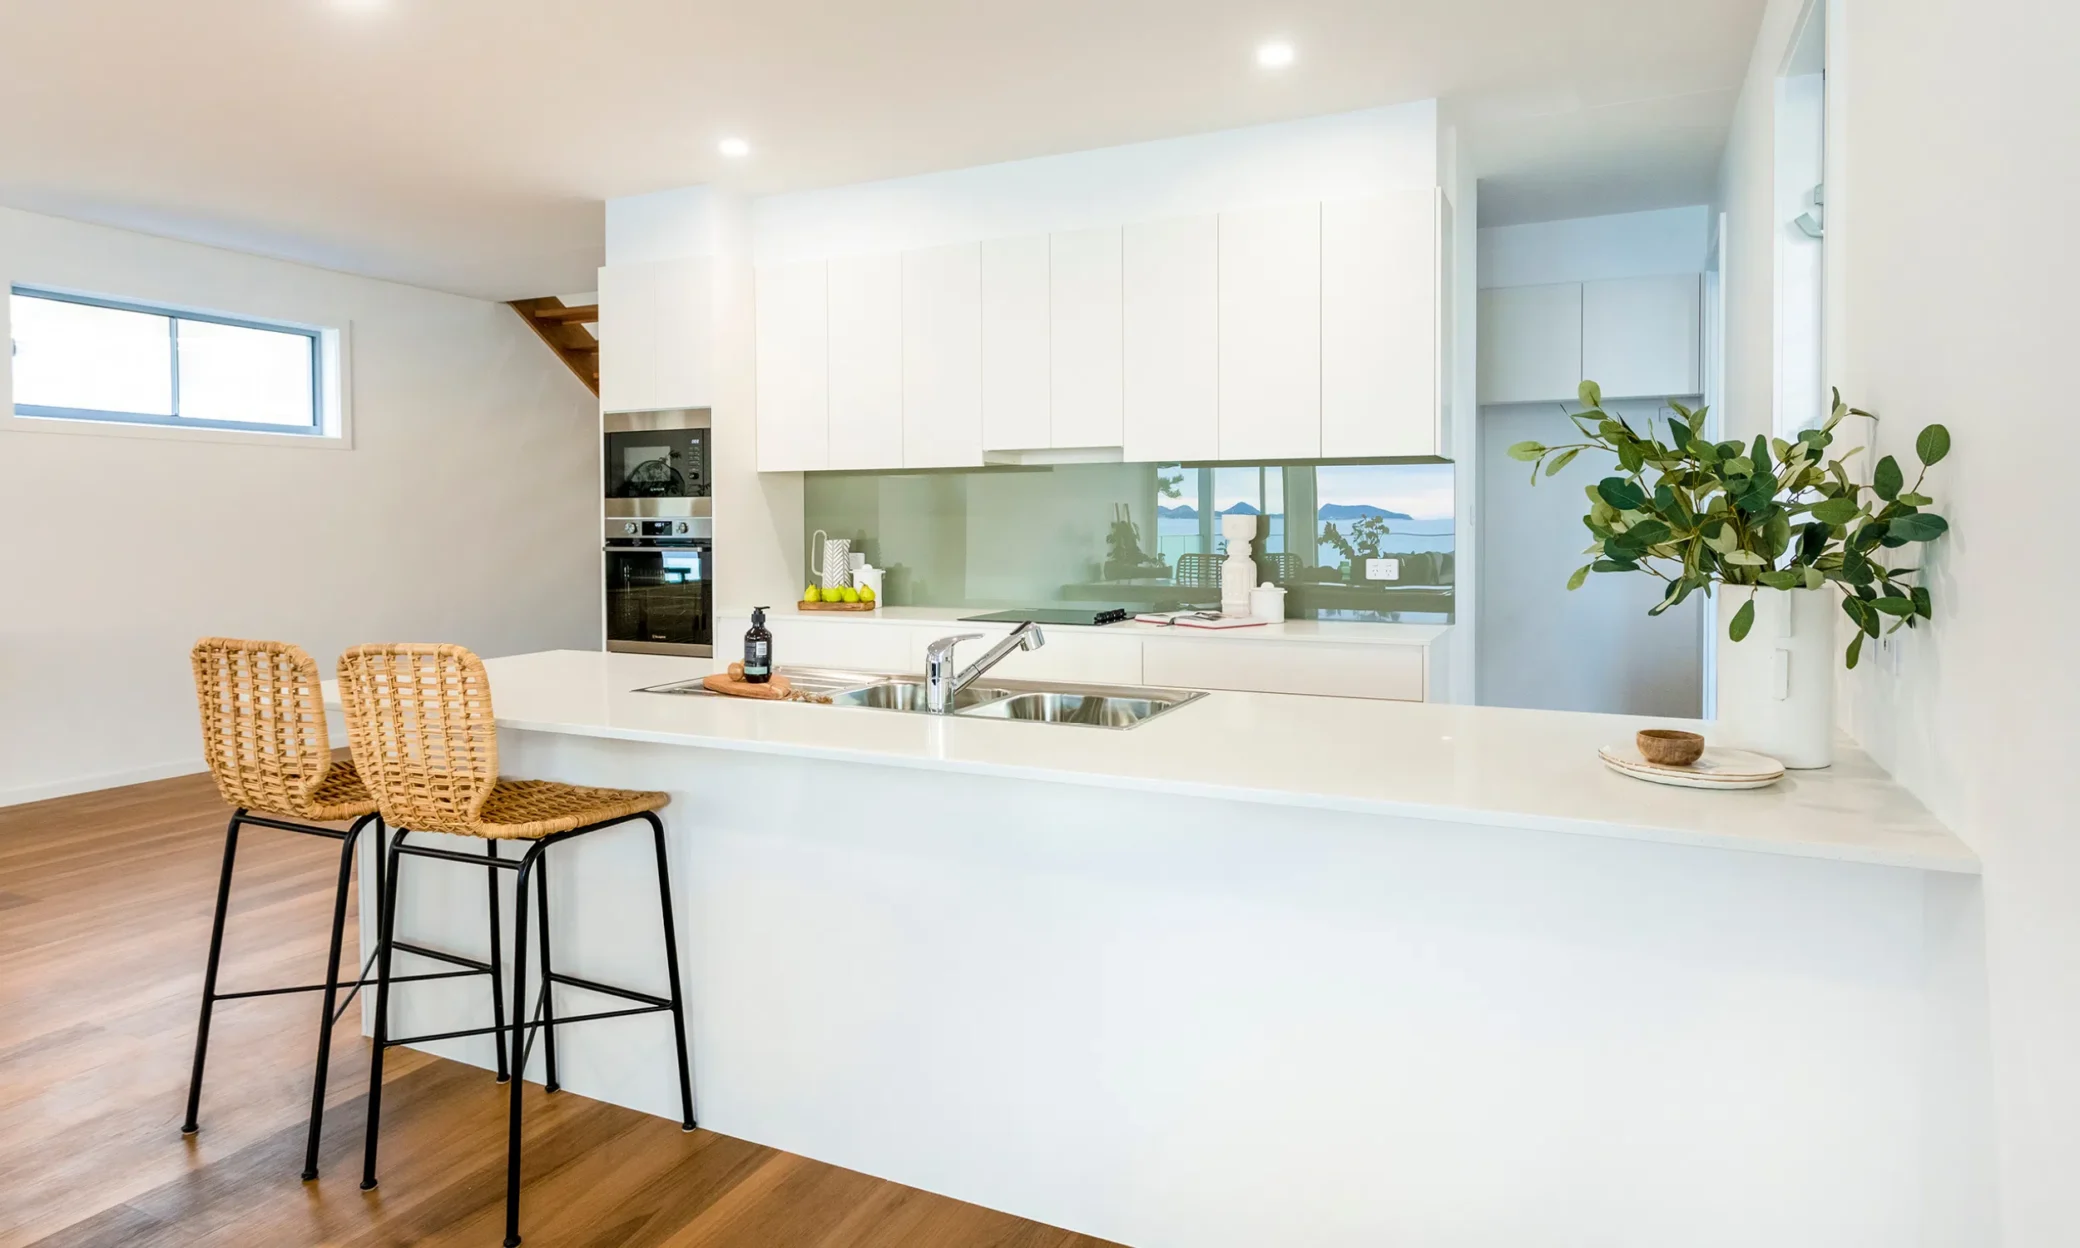 A modern kitchen featuring white cabinetry and countertops, with a central island and two wicker bar stools. Wooden flooring complements the room. A green potted plant and a reflective backsplash add to